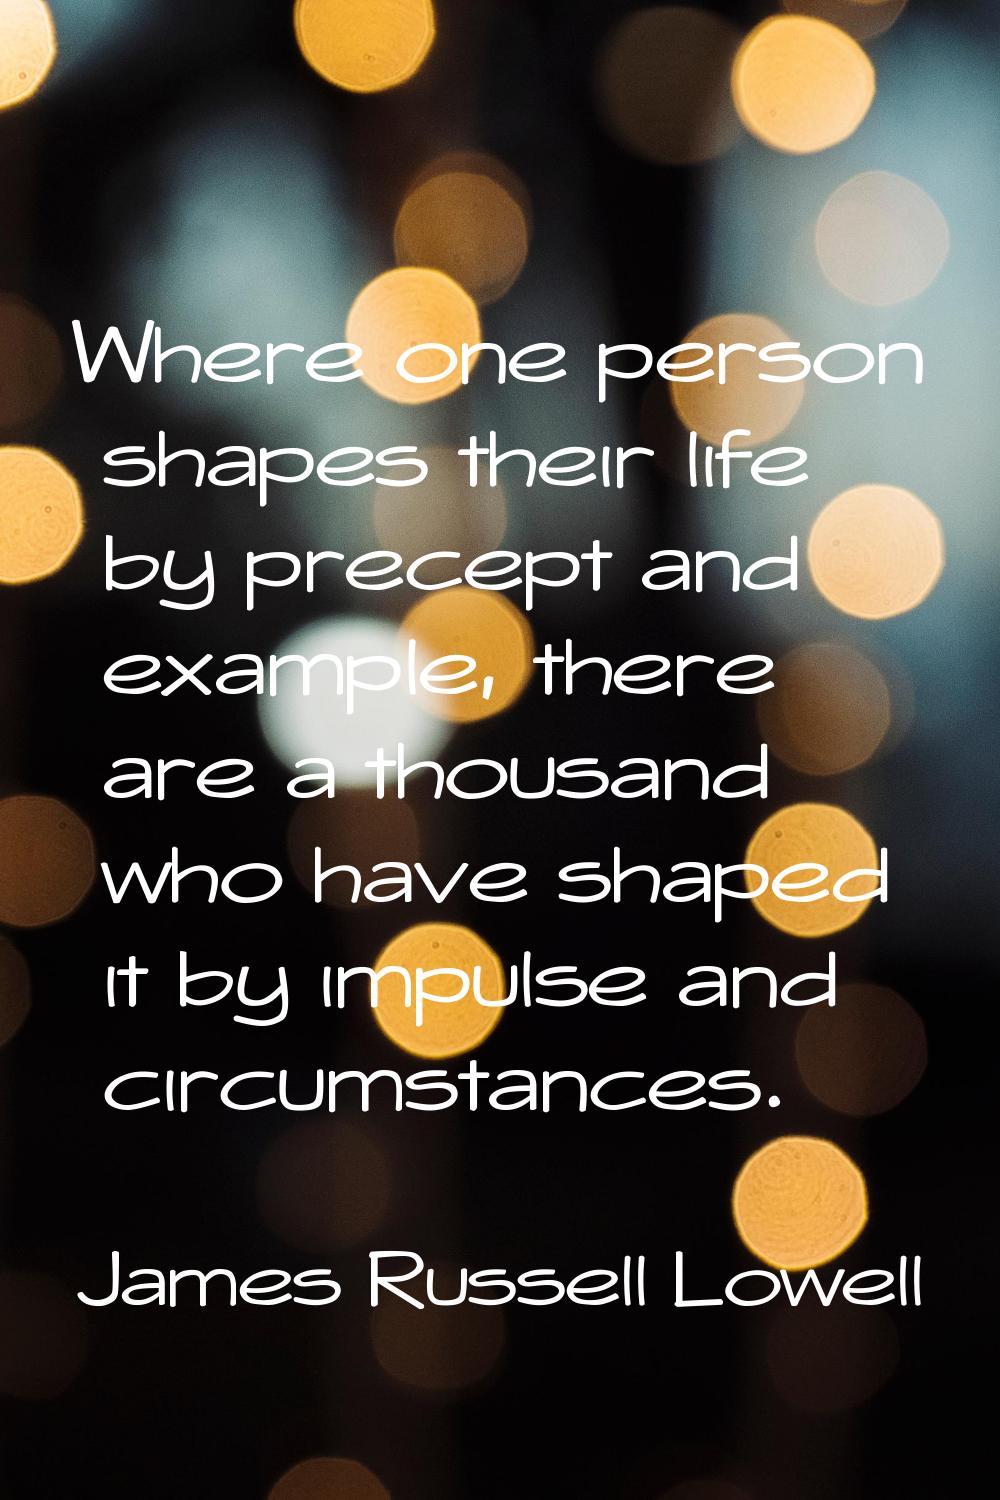 Where one person shapes their life by precept and example, there are a thousand who have shaped it 